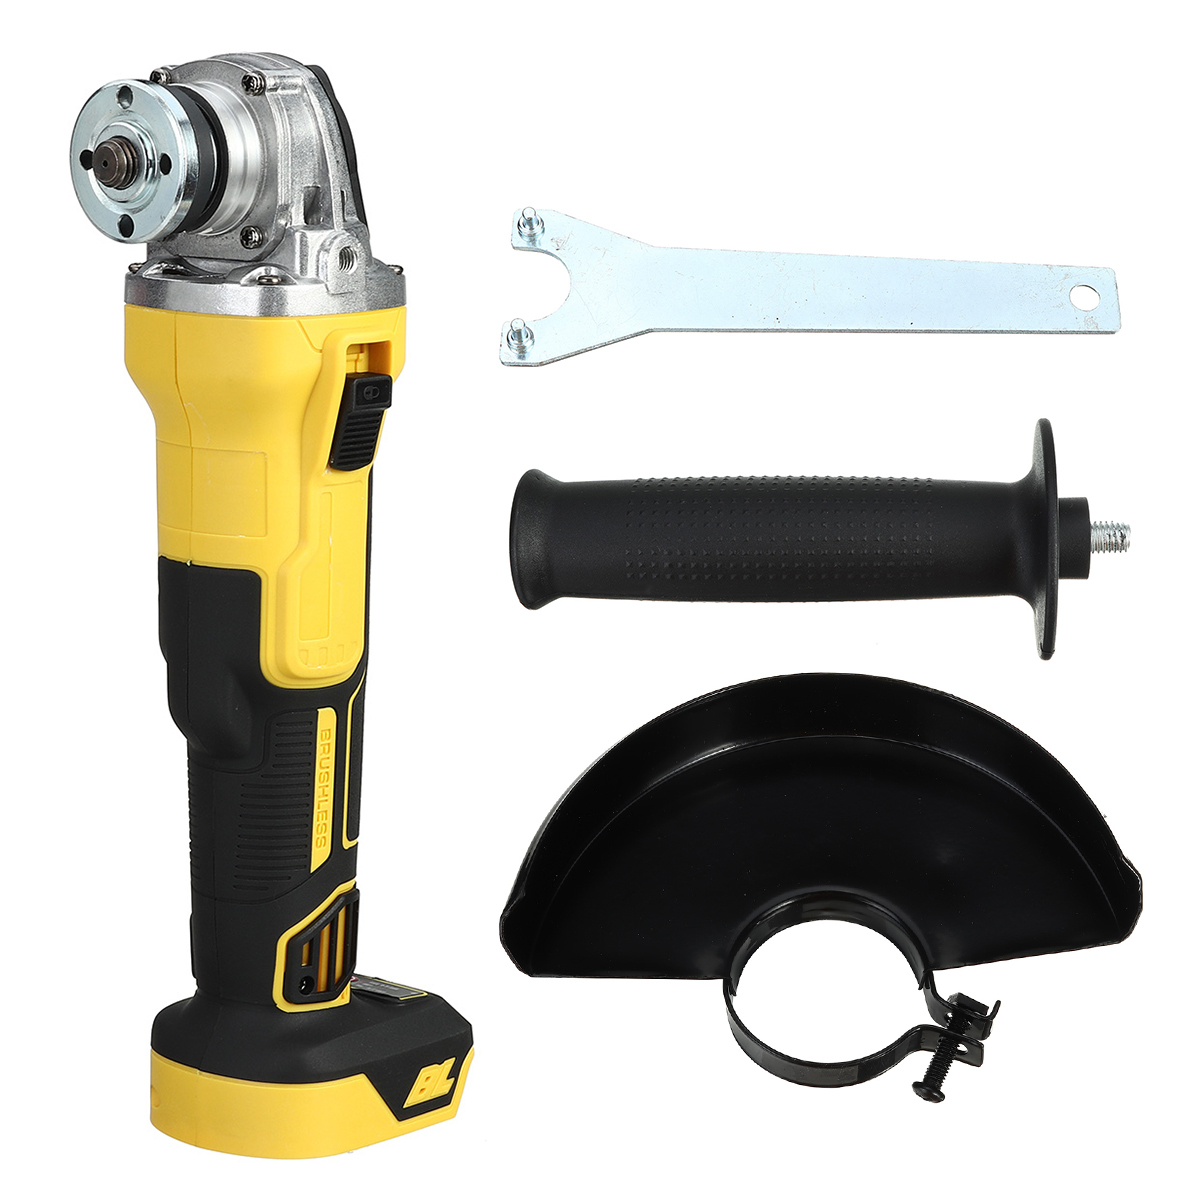 125mm-Brushless-Rechargeable-Angle-Grinder-Electric-Polishing-Cutting-Machine-For-Makita-18V-Battery-1751312-5